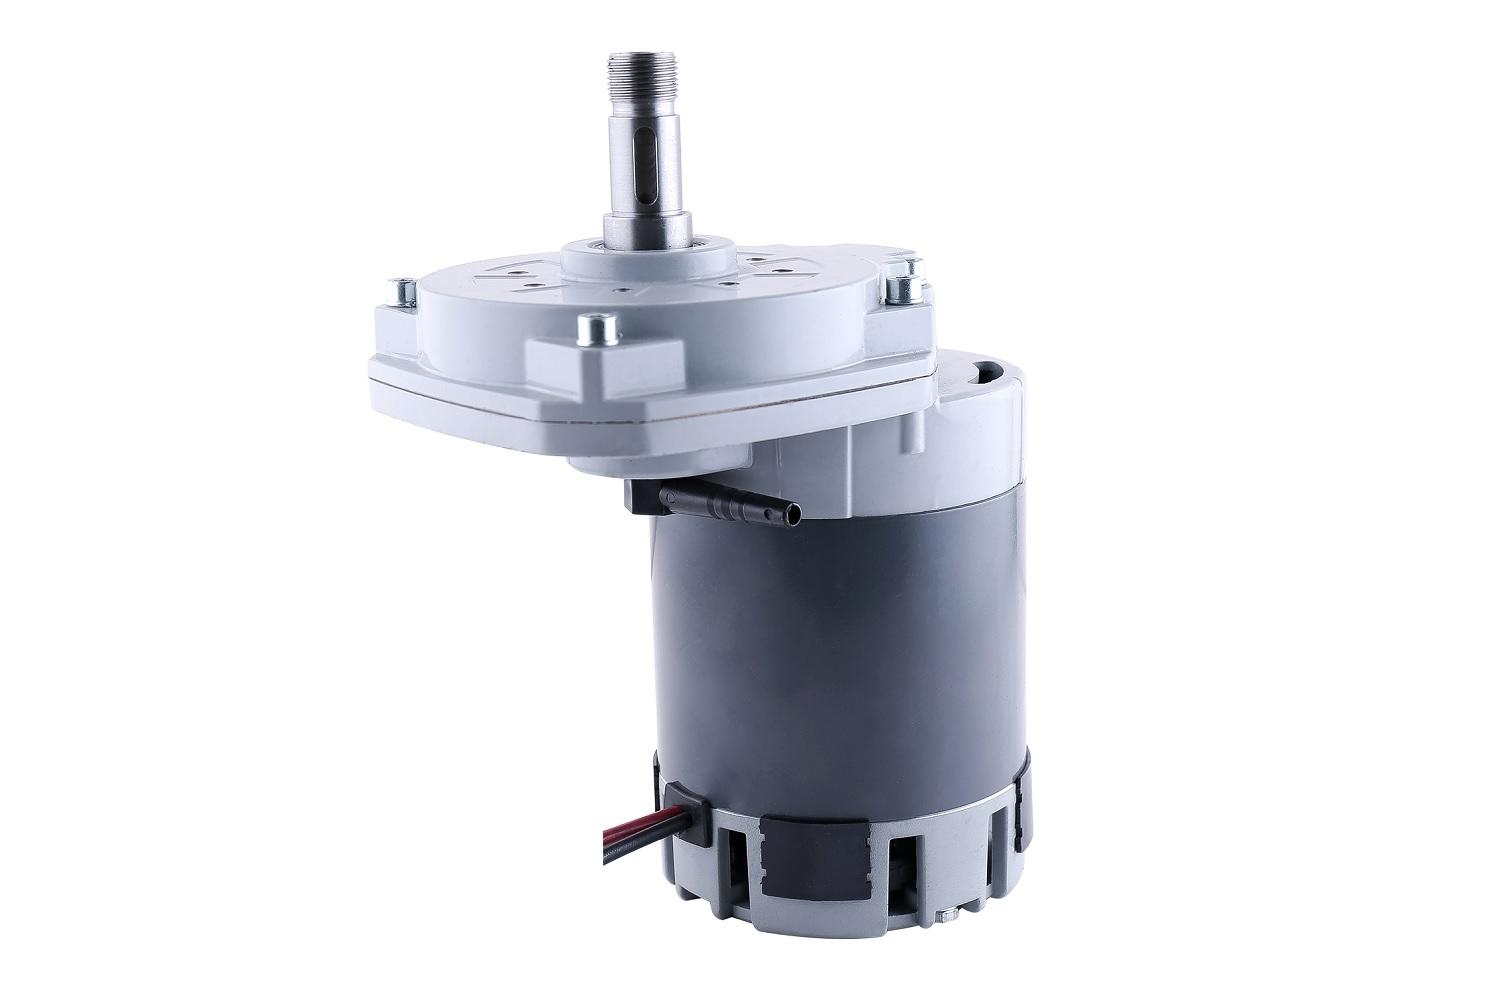 How should the gear reduction motor be maintained?